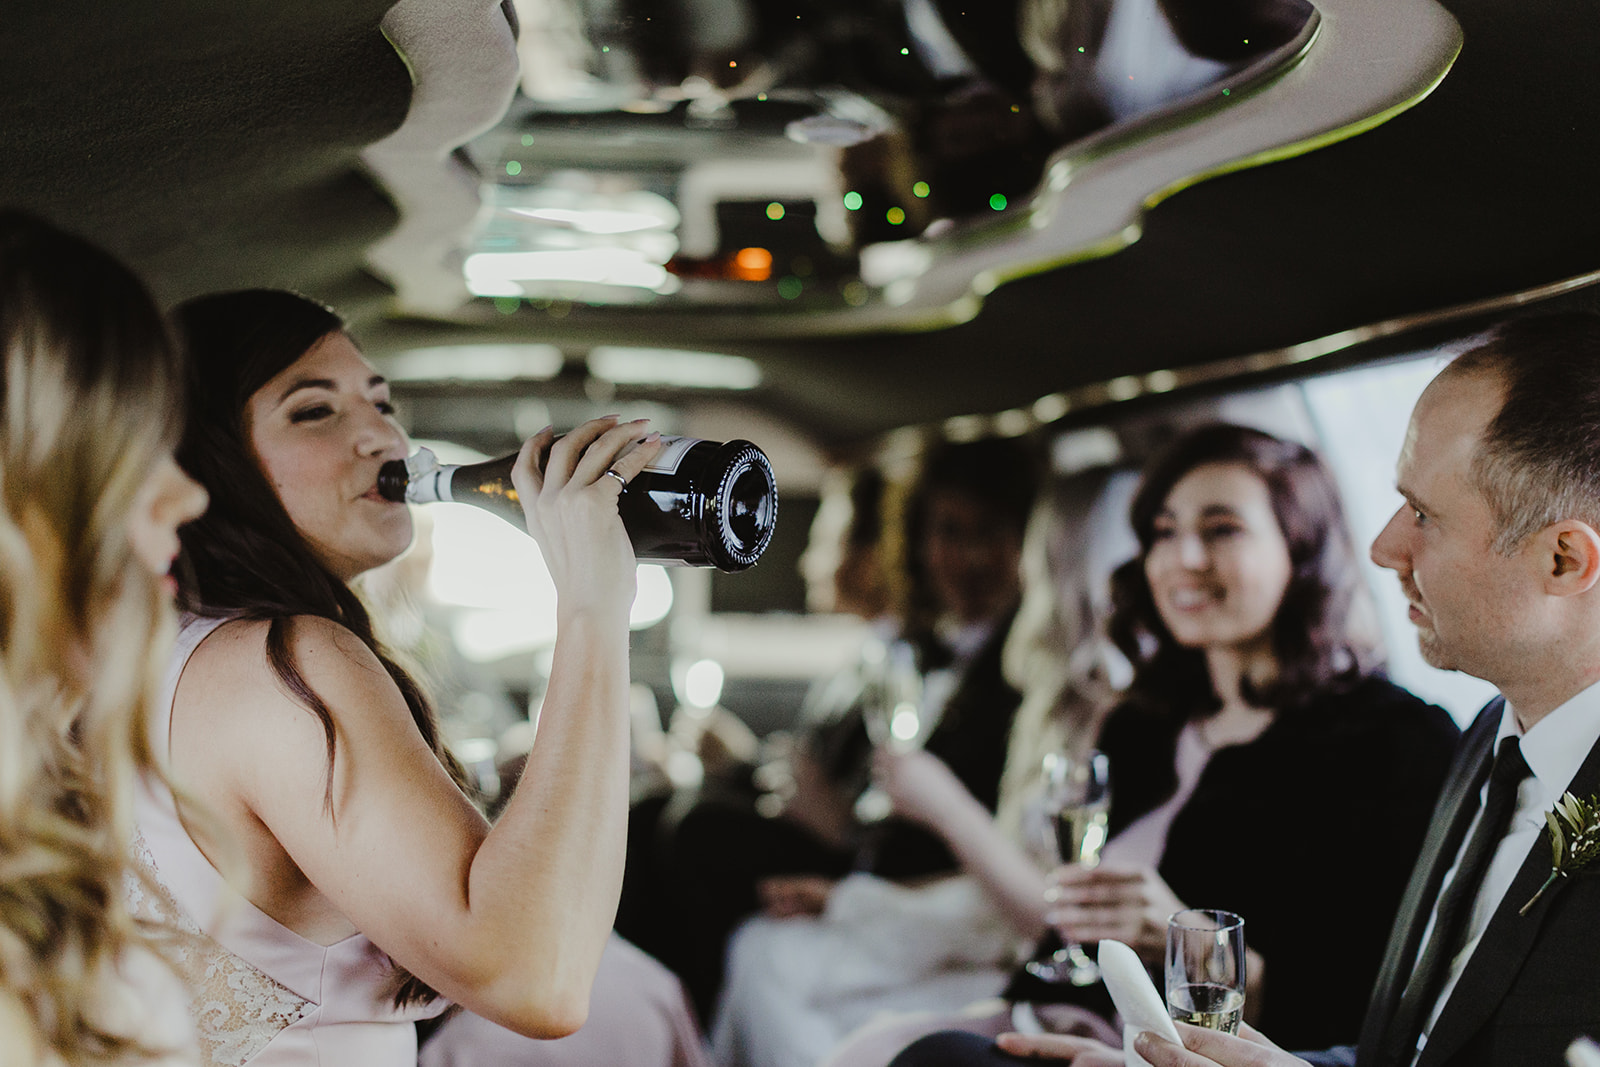 A wedding part celebrating in a limo after a wedding ceremony